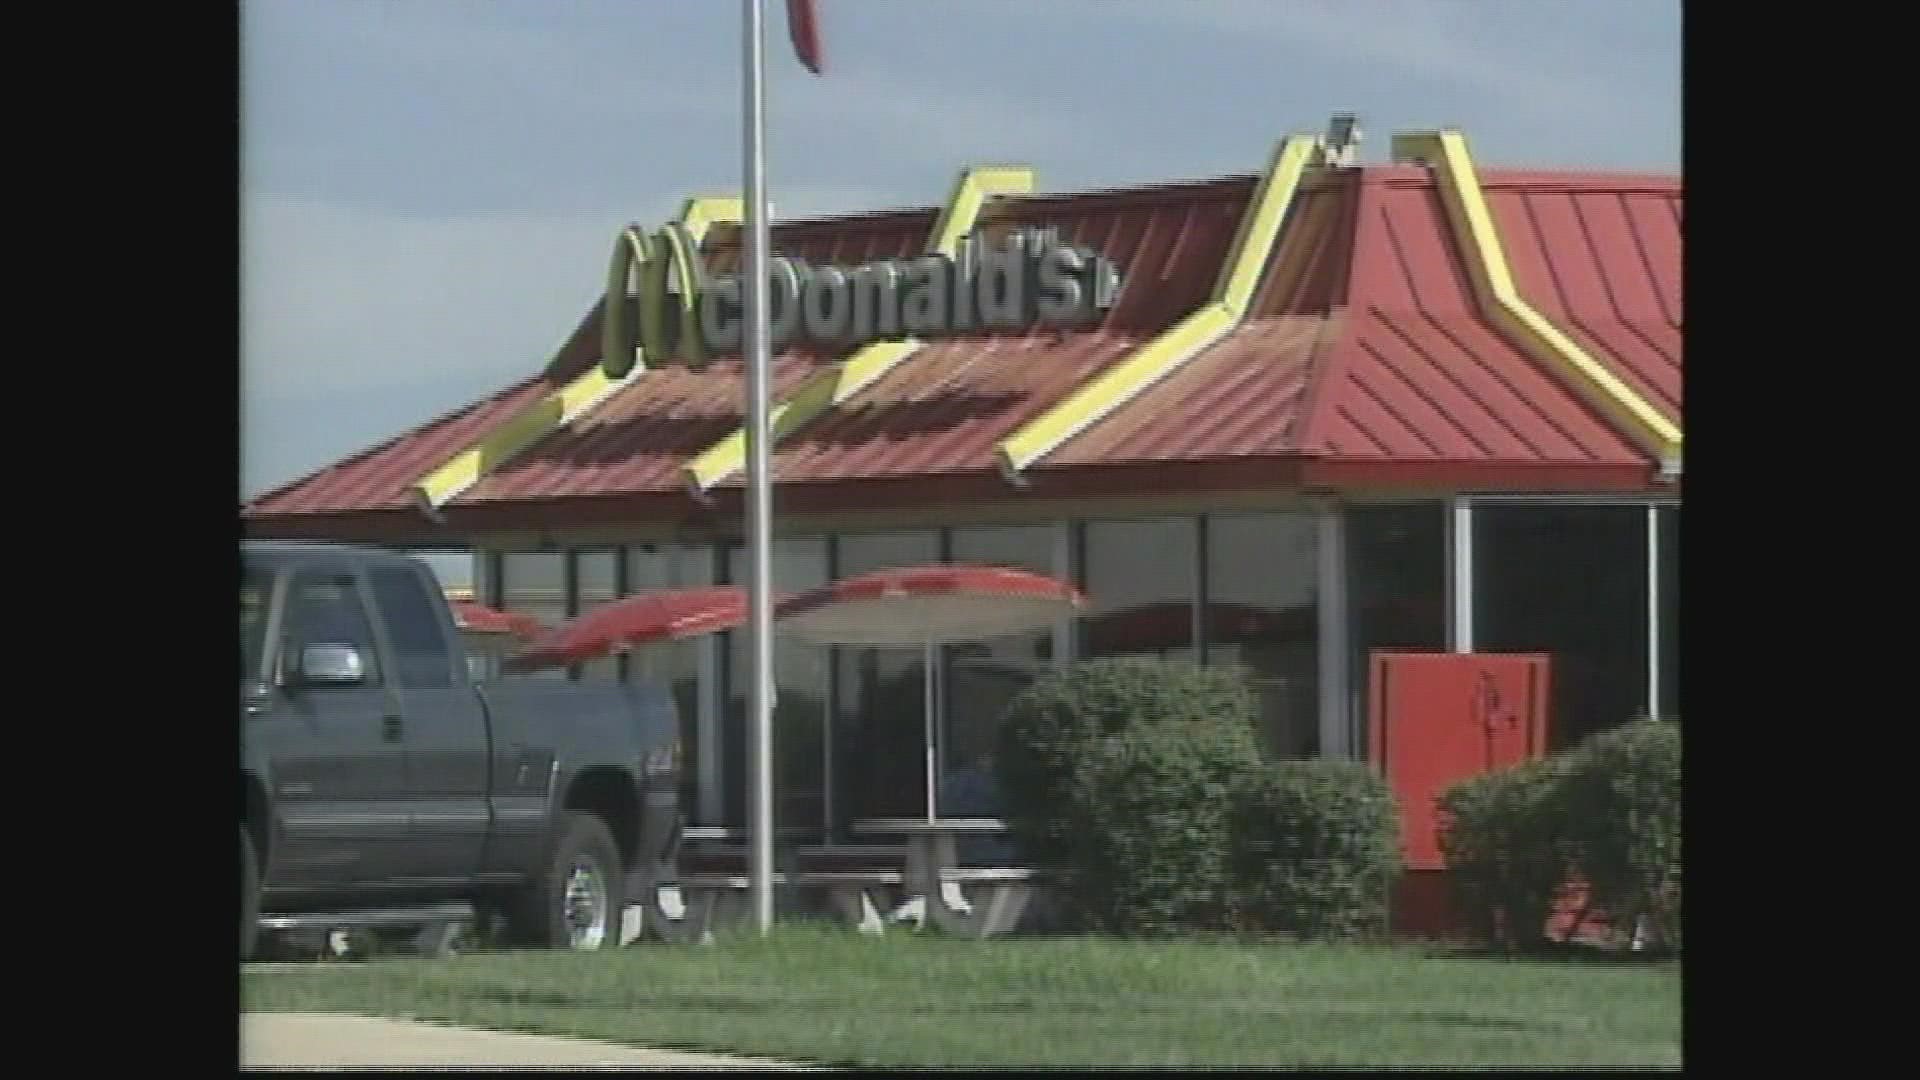 The prank caller convinced a Mt. Washington, Kentucky McDonald's manager to strip-search her employee in 2004. The incident led to court cases and lawsuits.